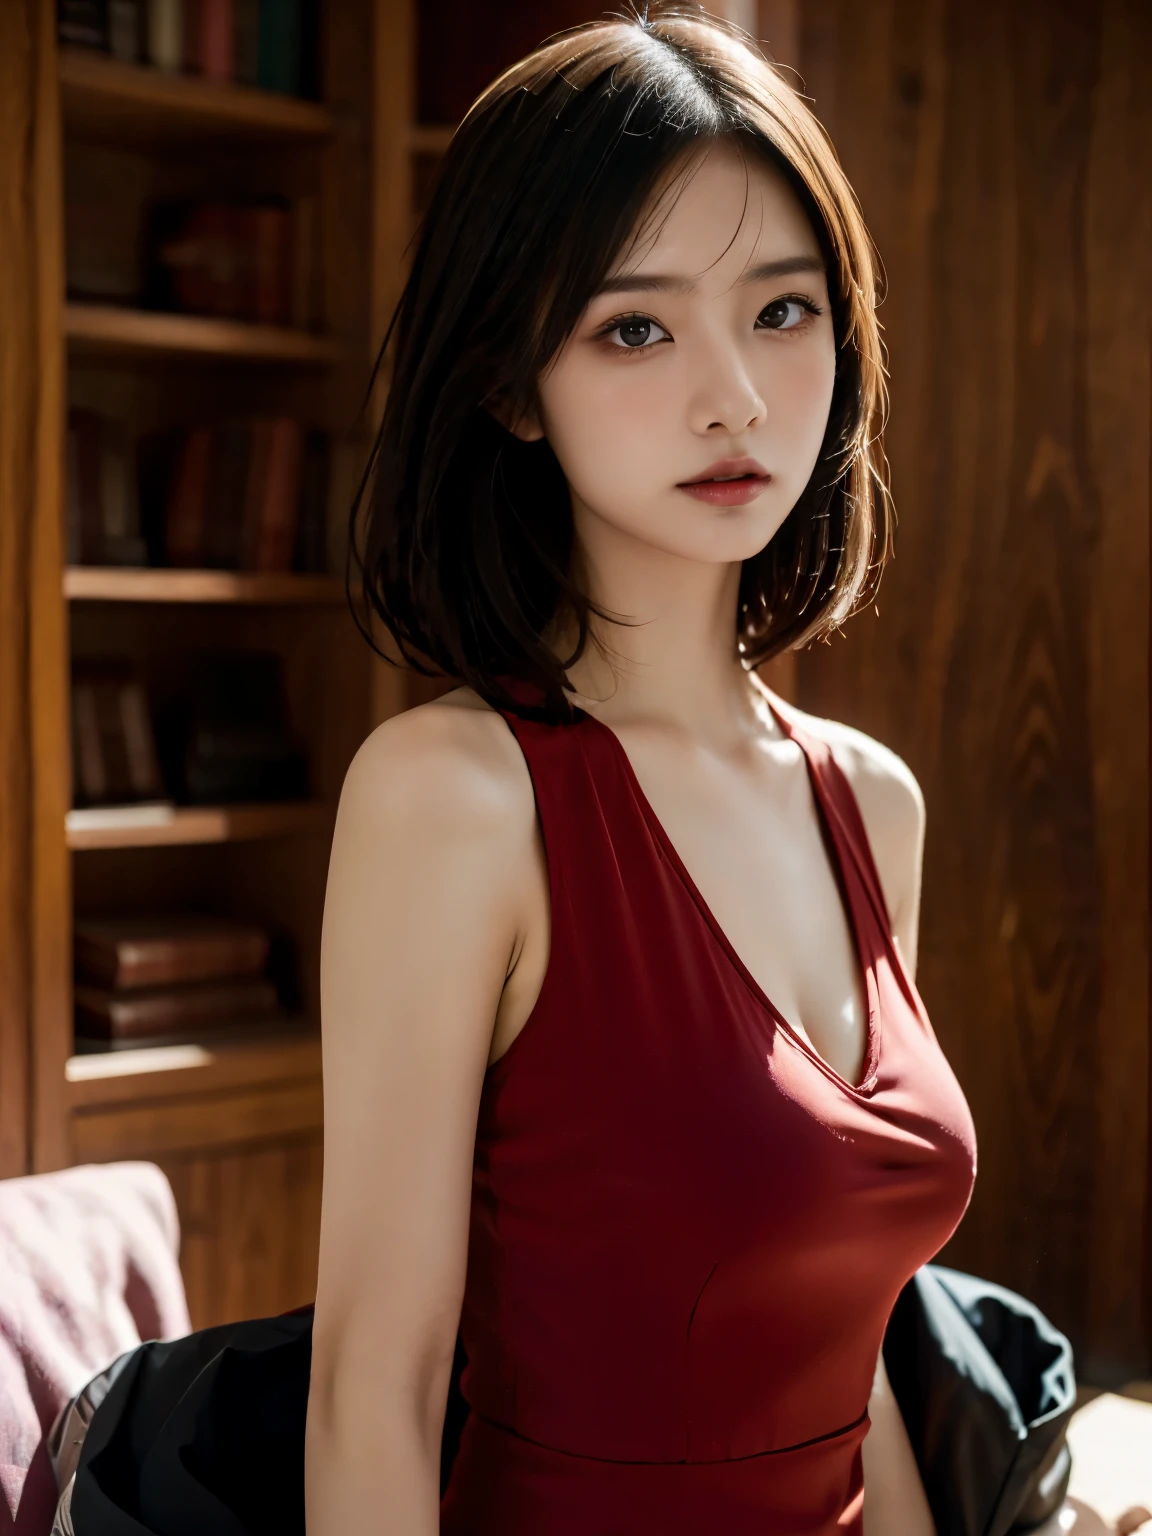 office of、Portrait of a woman in a business suit, highest quality、hyper HD、Yoshitomo Nara, japanese model, beautiful japanese girl, with short hair, 27 years old female model, 4K ], 4K], 27 years old, sakimichan, sakimichan